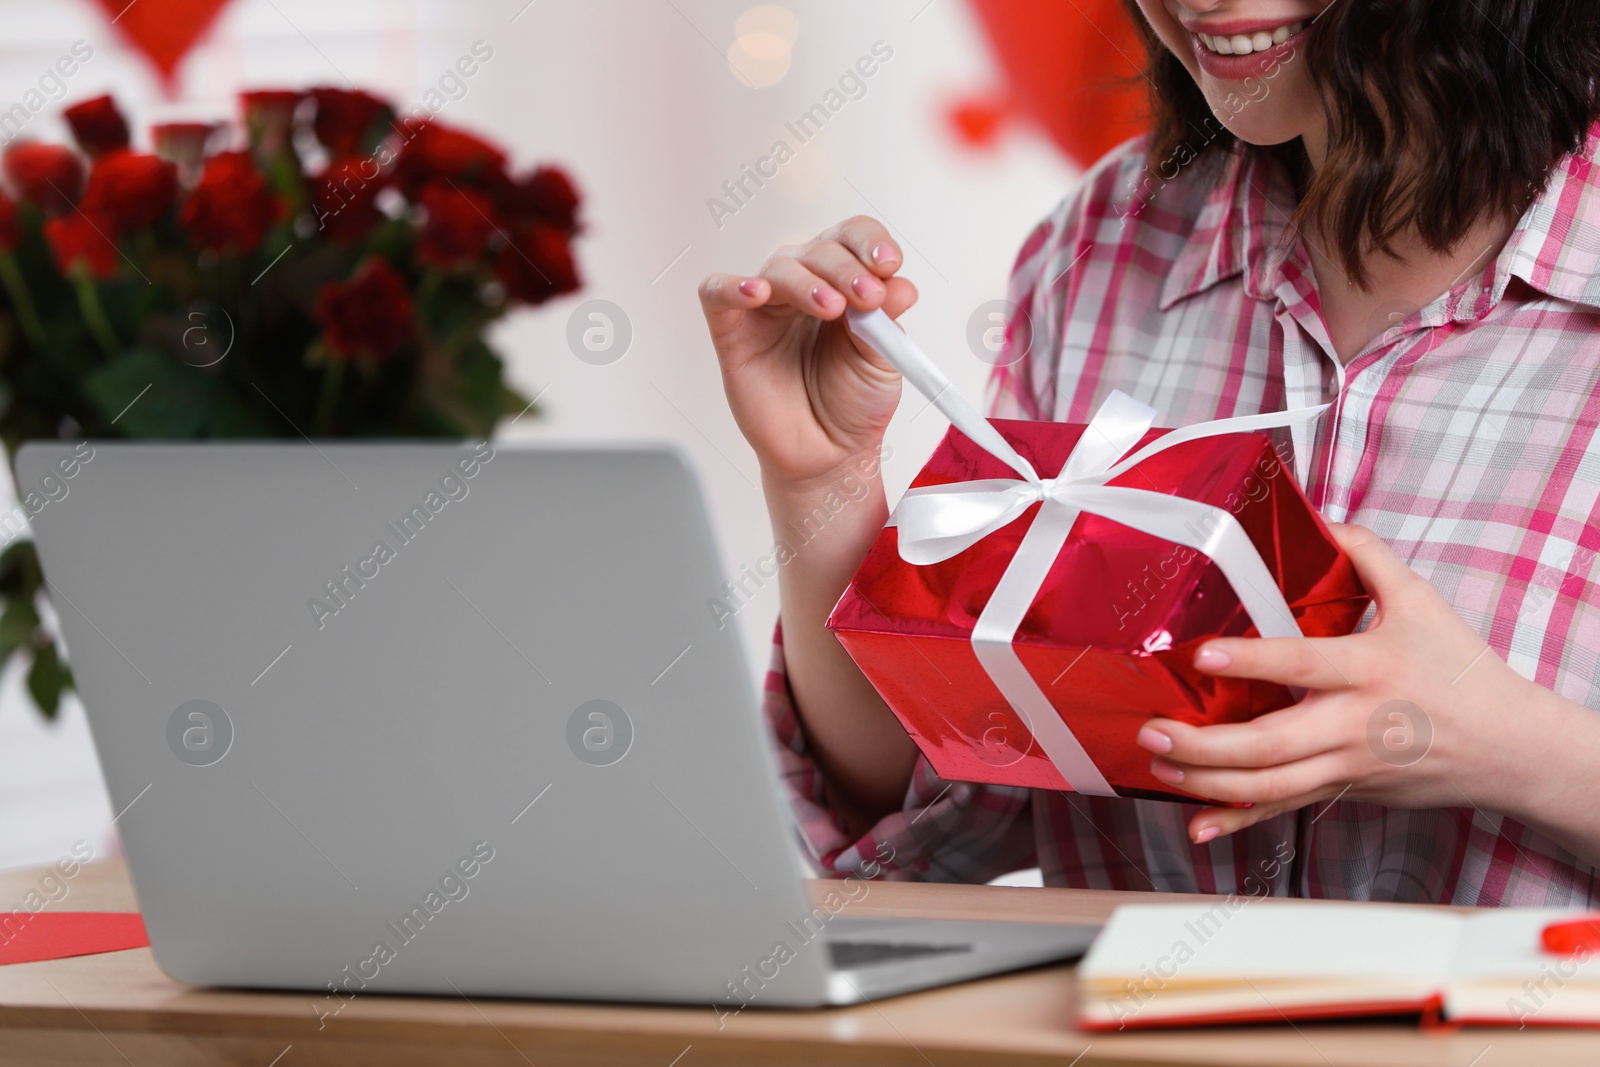 Photo of Valentine's day celebration in long distance relationship. Woman opening gift from her boyfriend indoors, closeup